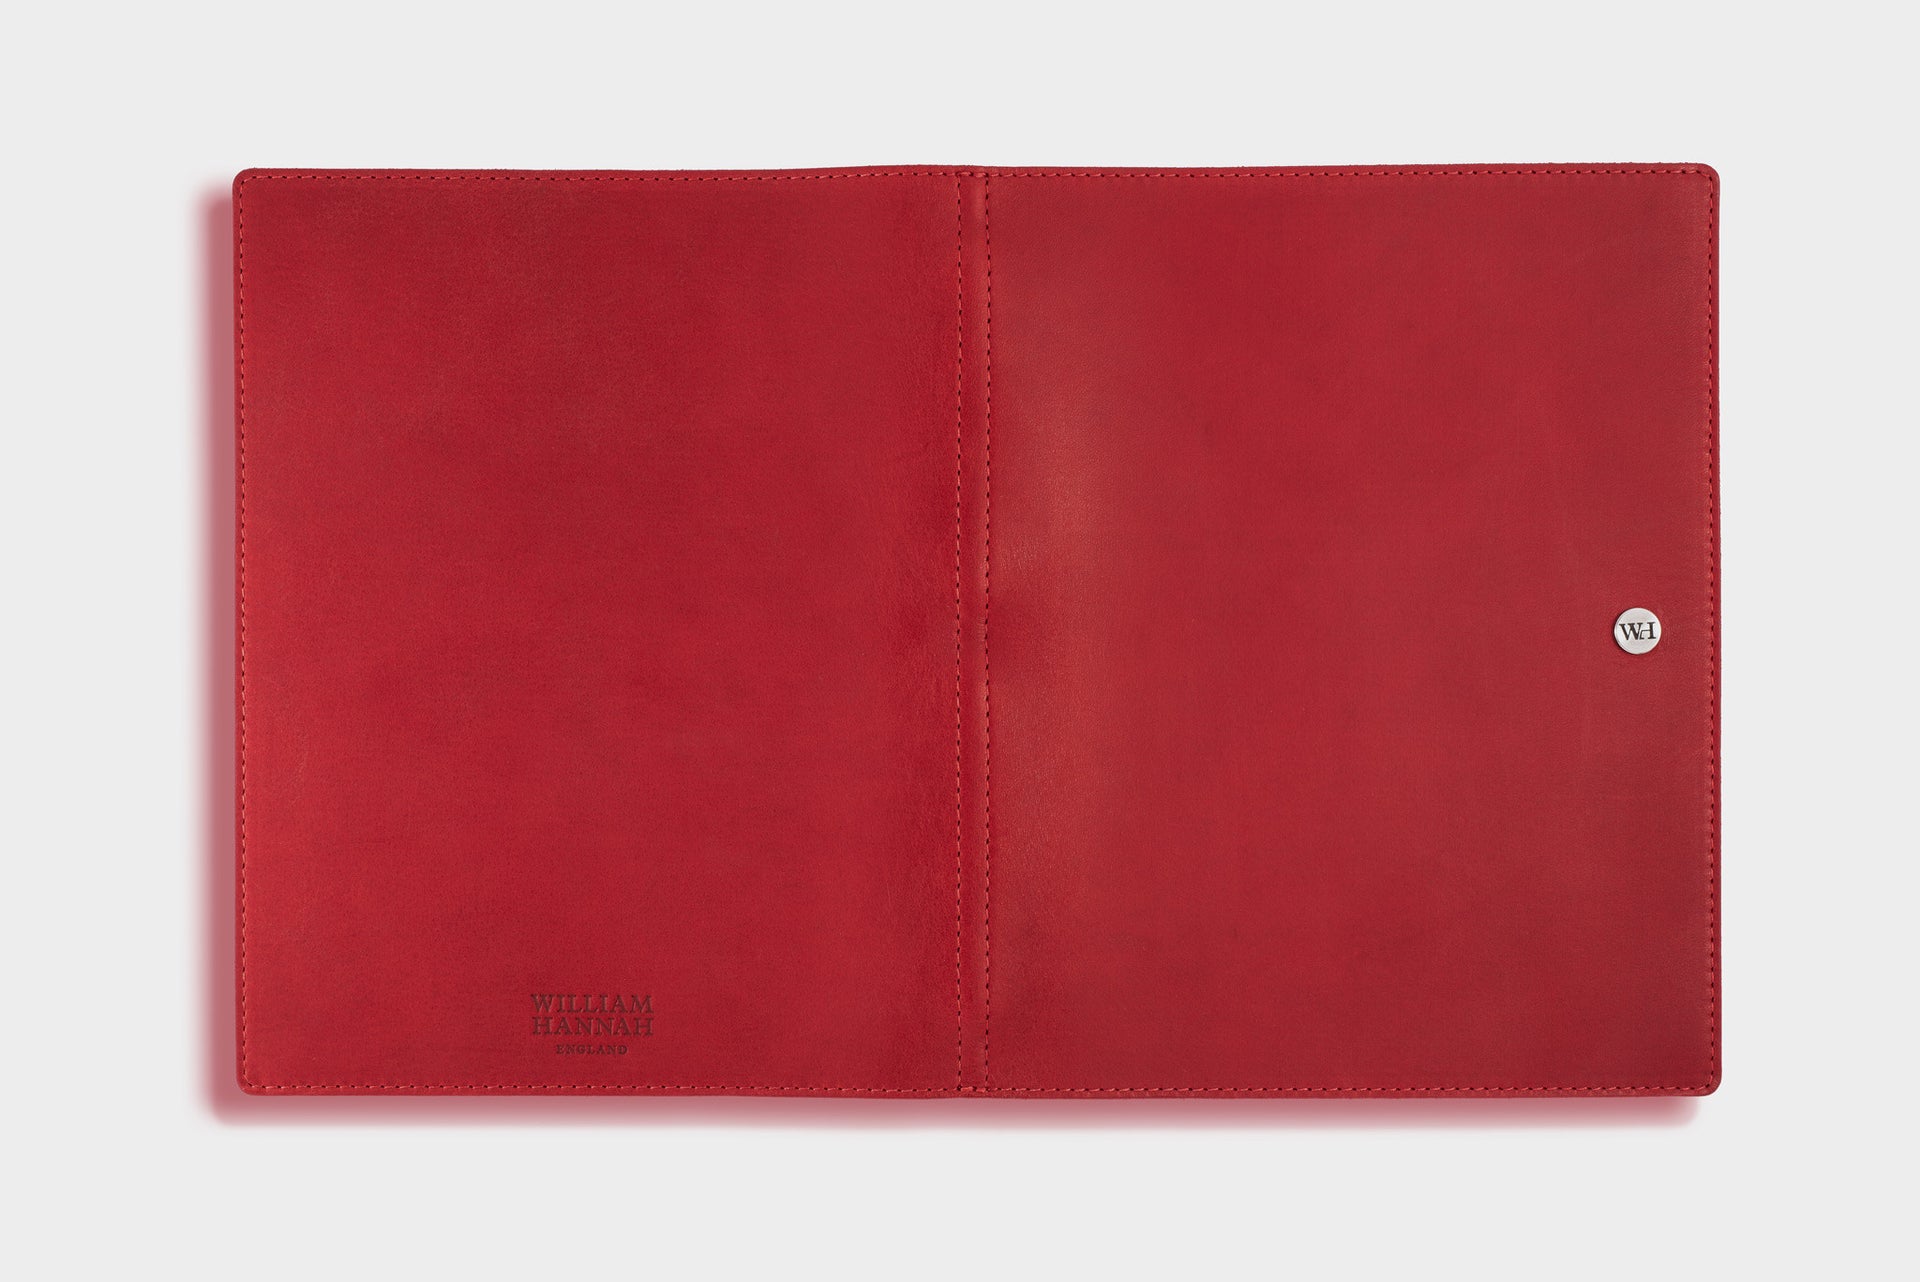 William Hannah Red leather and Red suede A5 notebook: full cover